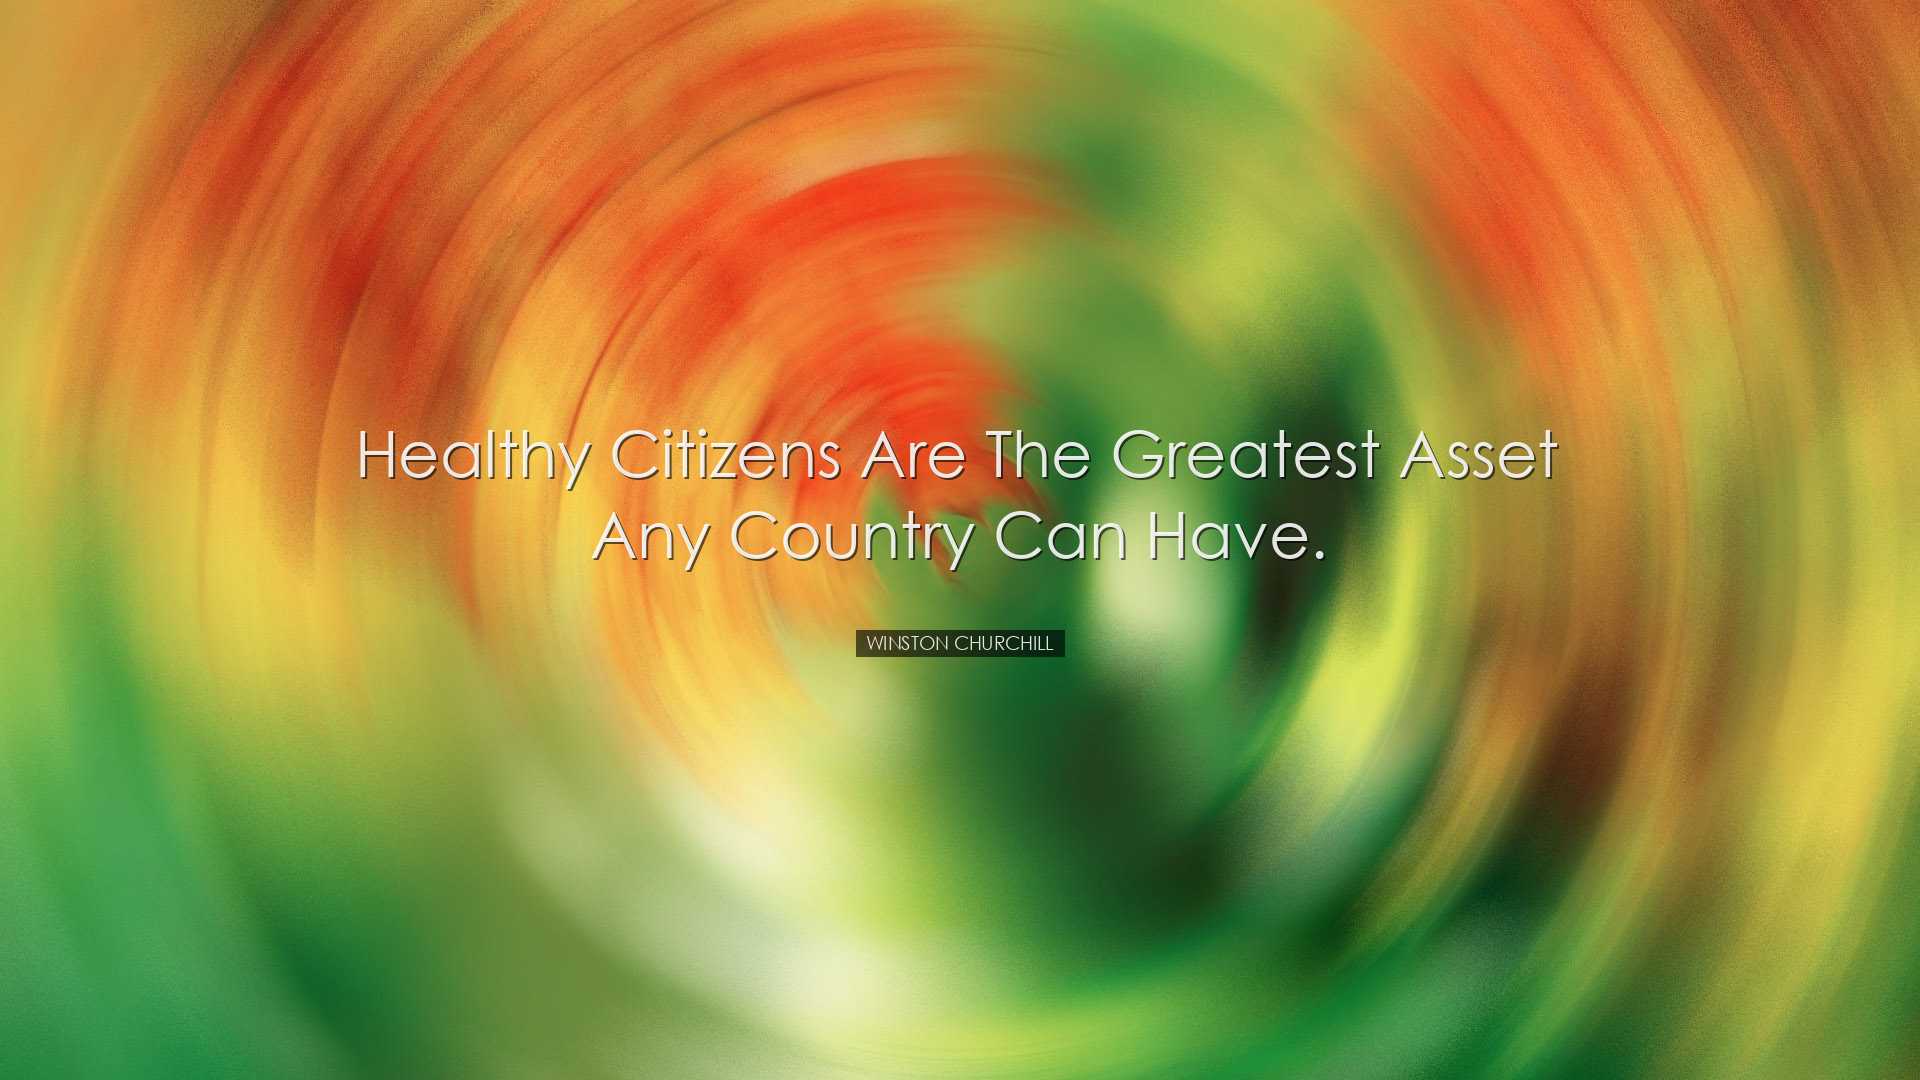 Healthy citizens are the greatest asset any country can have. - Wi